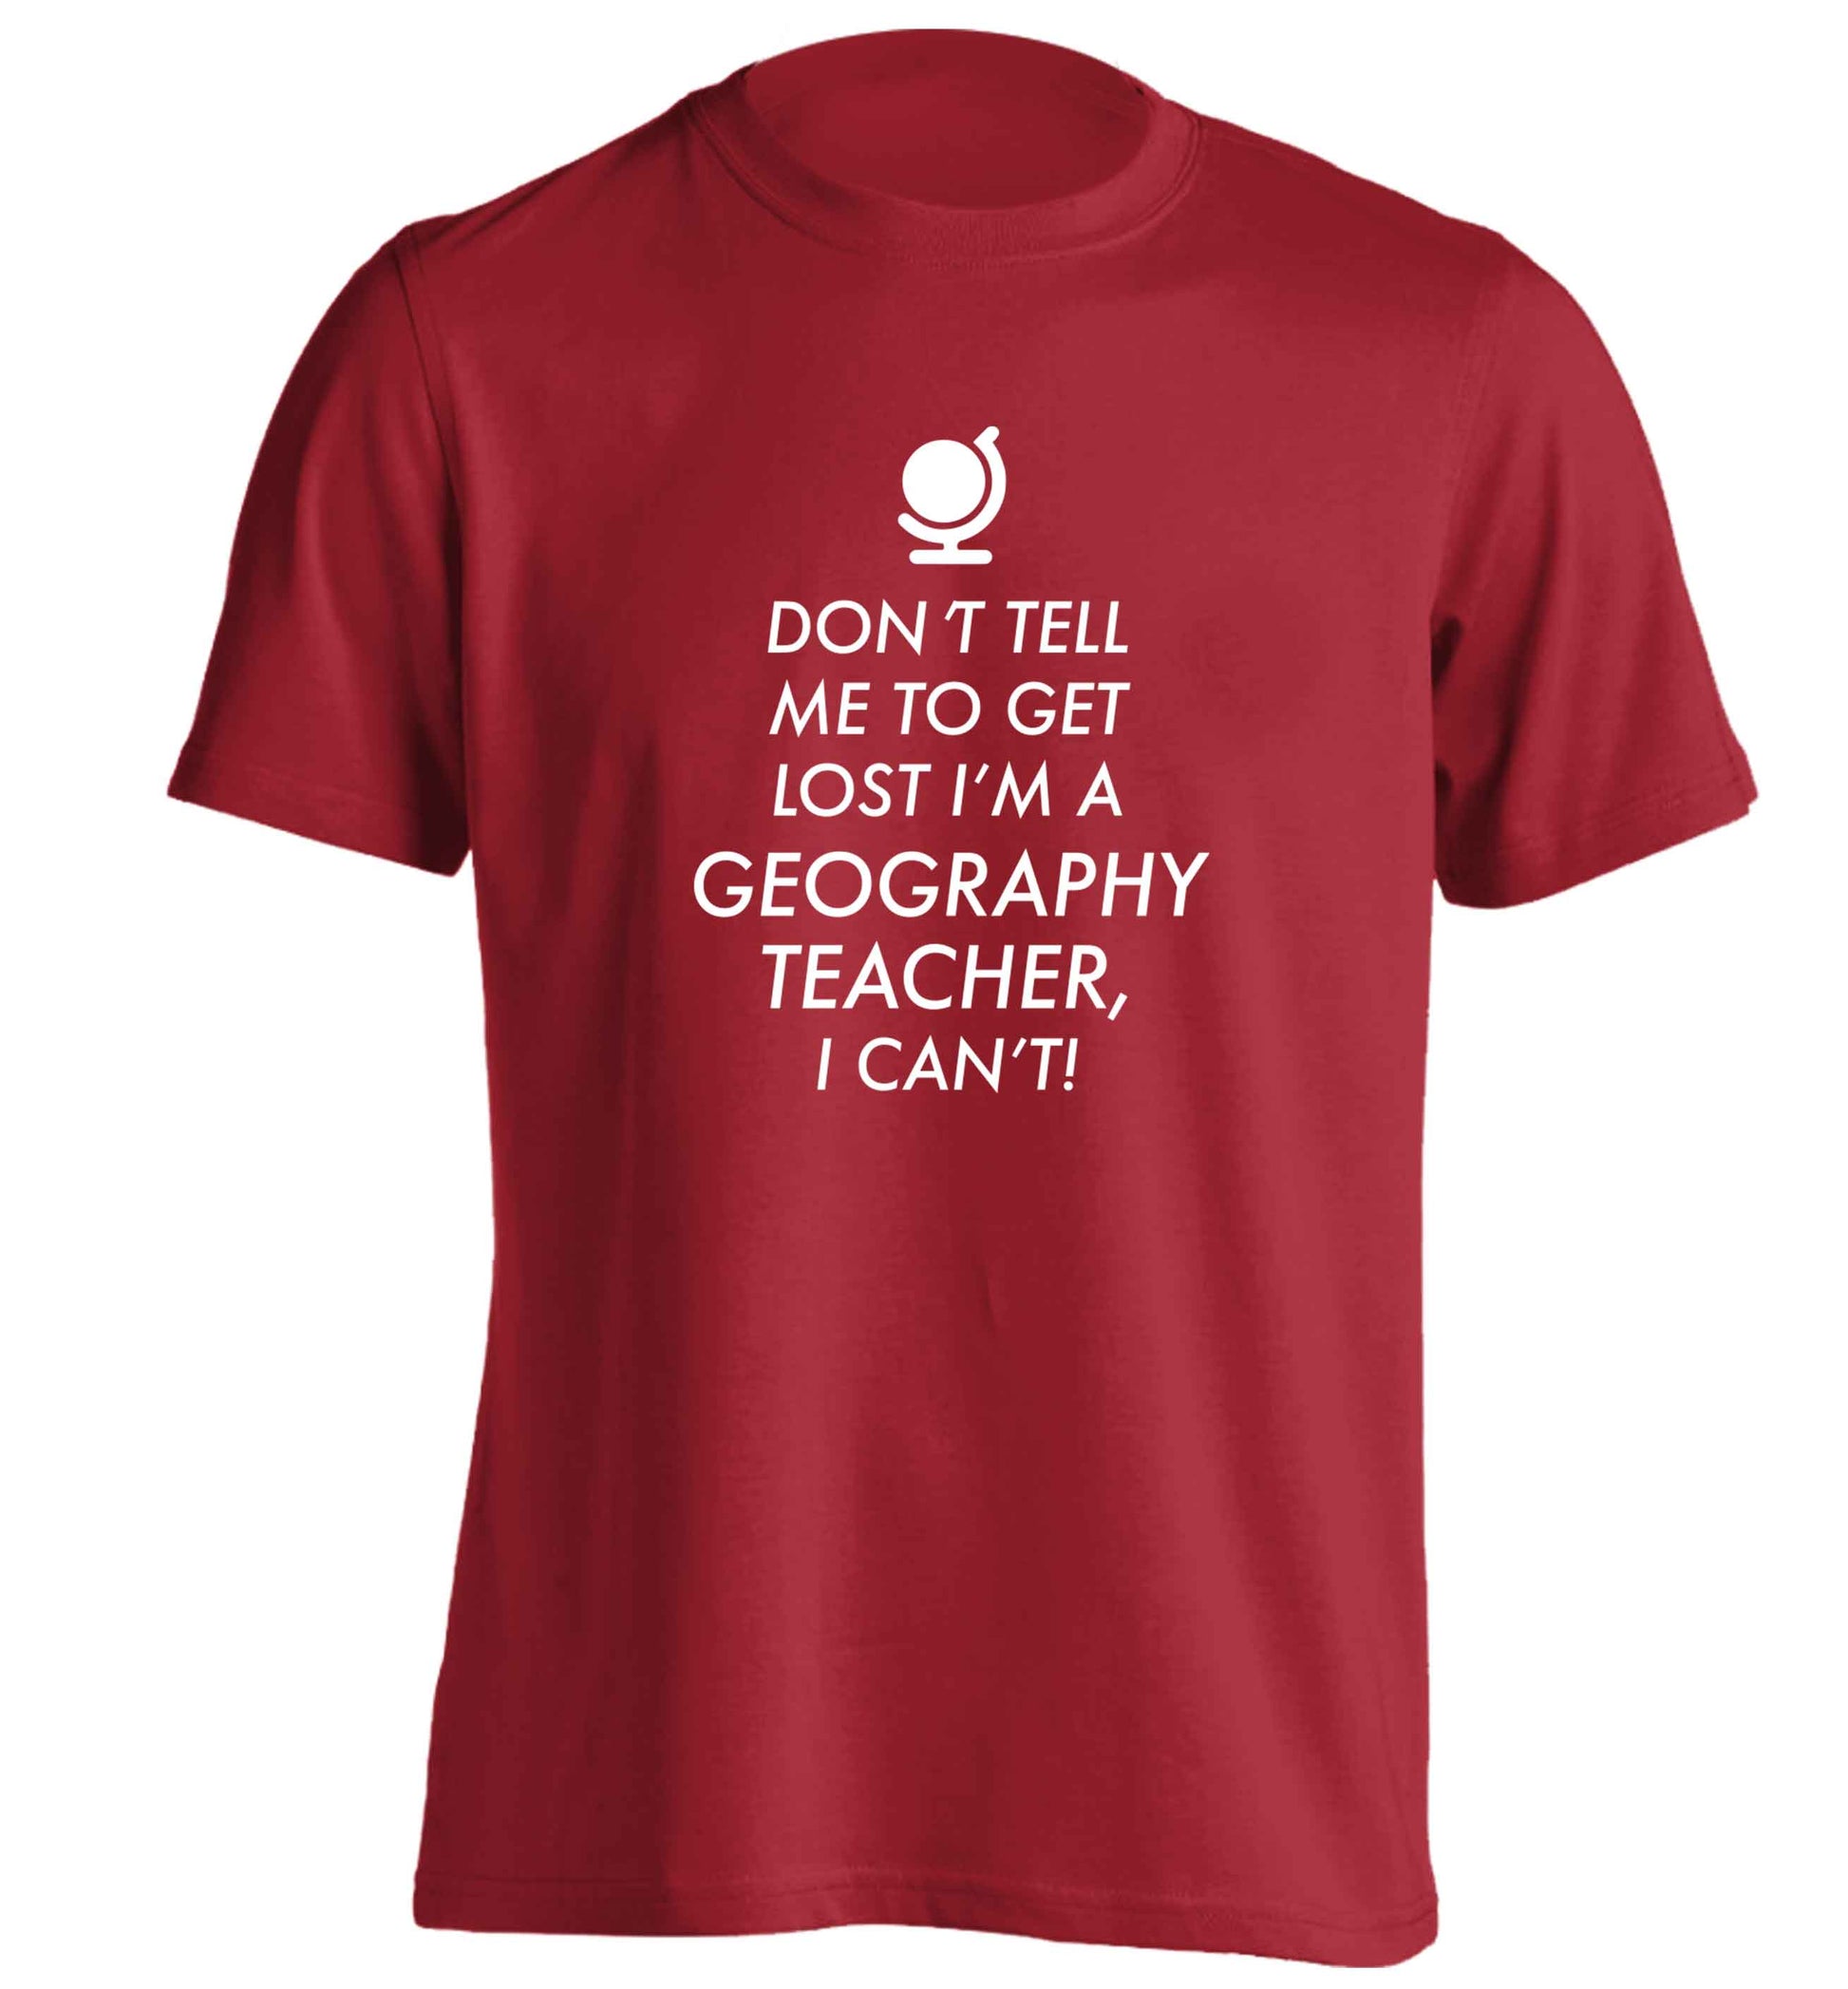 Don't tell me to get lost I'm a geography teacher, I can't adults unisex red Tshirt 2XL